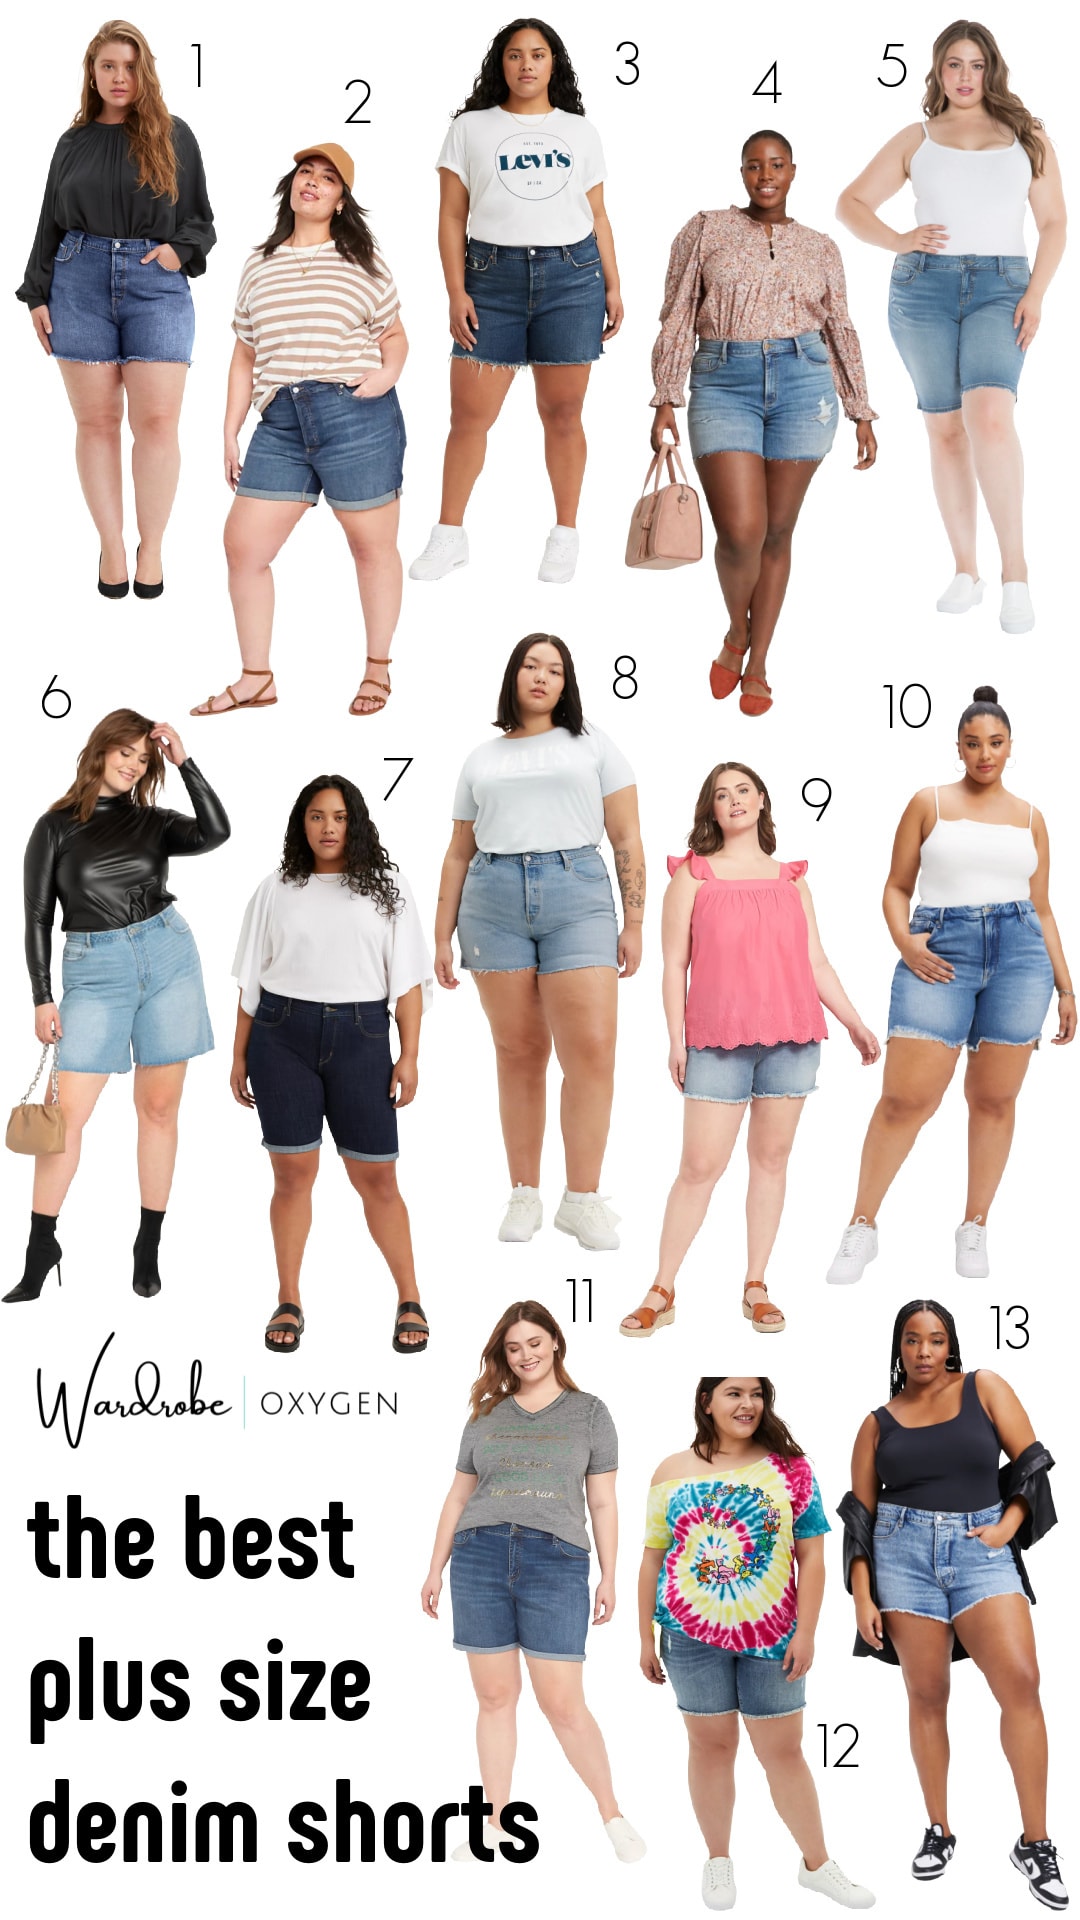 The Best Denim Shorts for Grown Women: 50+ Options, Size-Inclusive Options